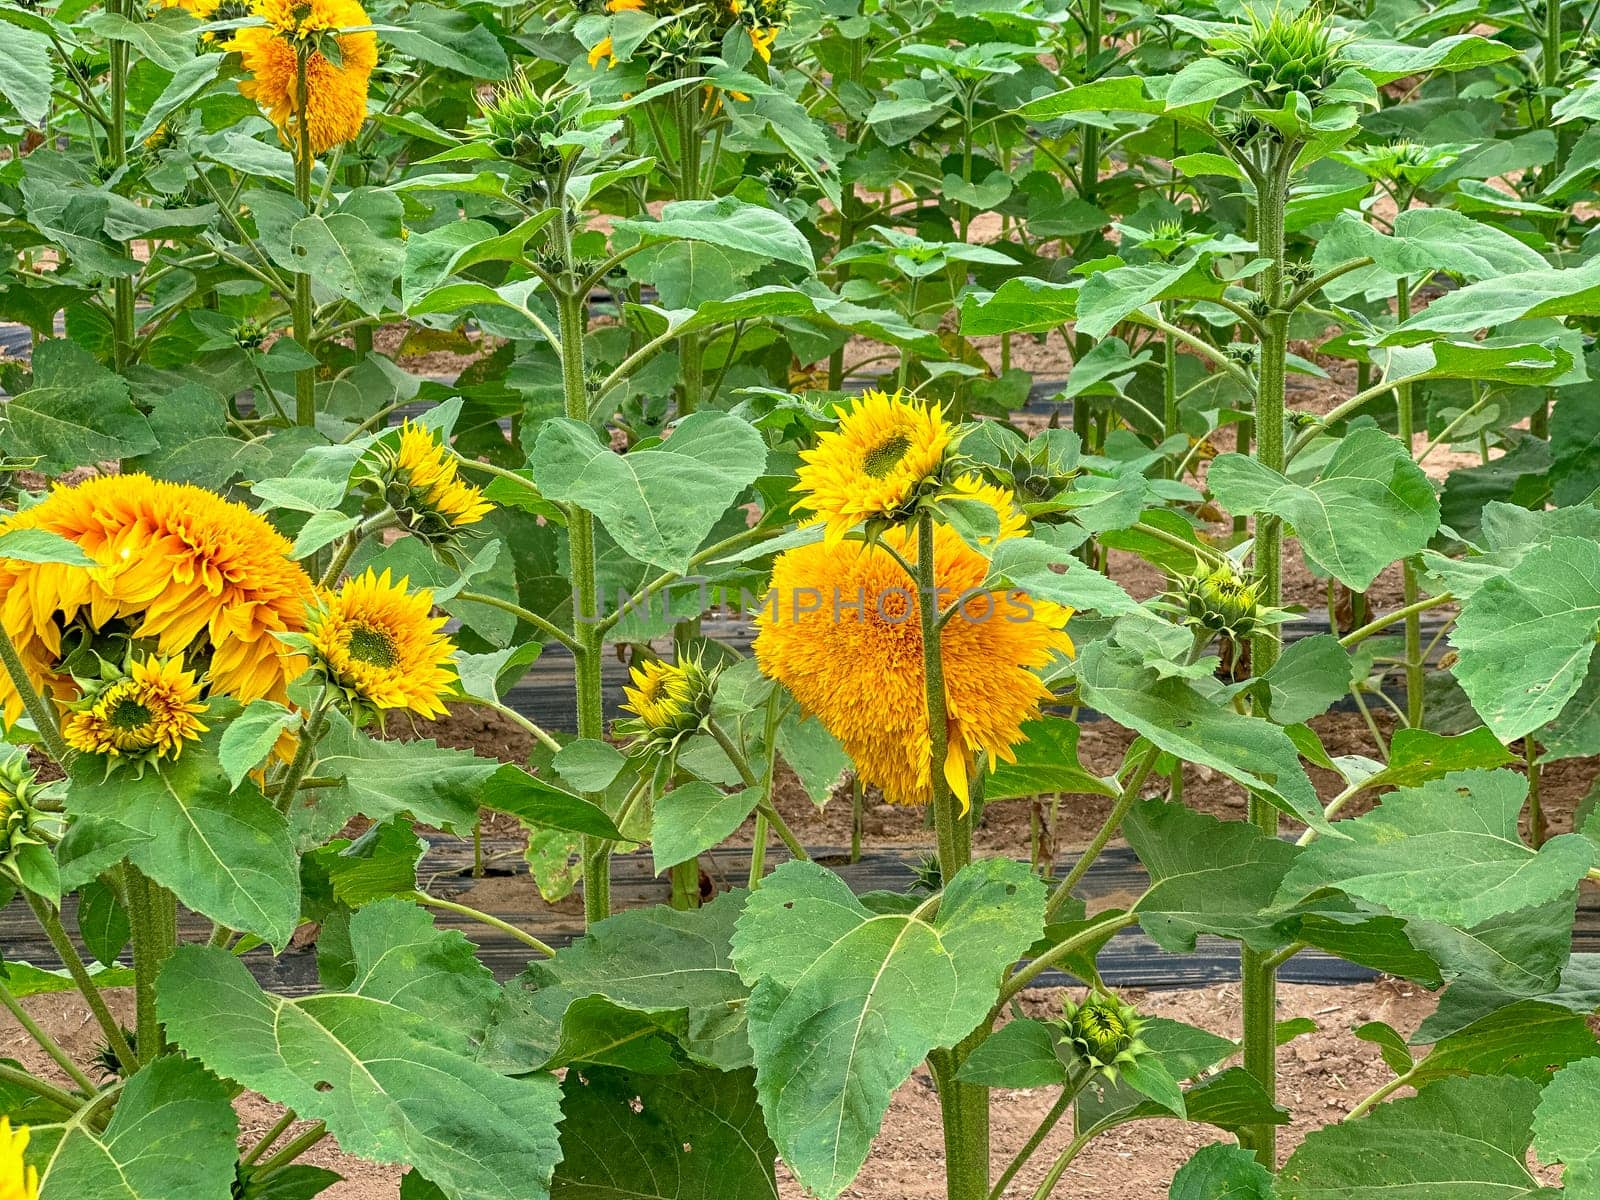 Blooming sunflower farm field, big bright yellow sunflower, agriculture concept harvest. Growing seeds for oil